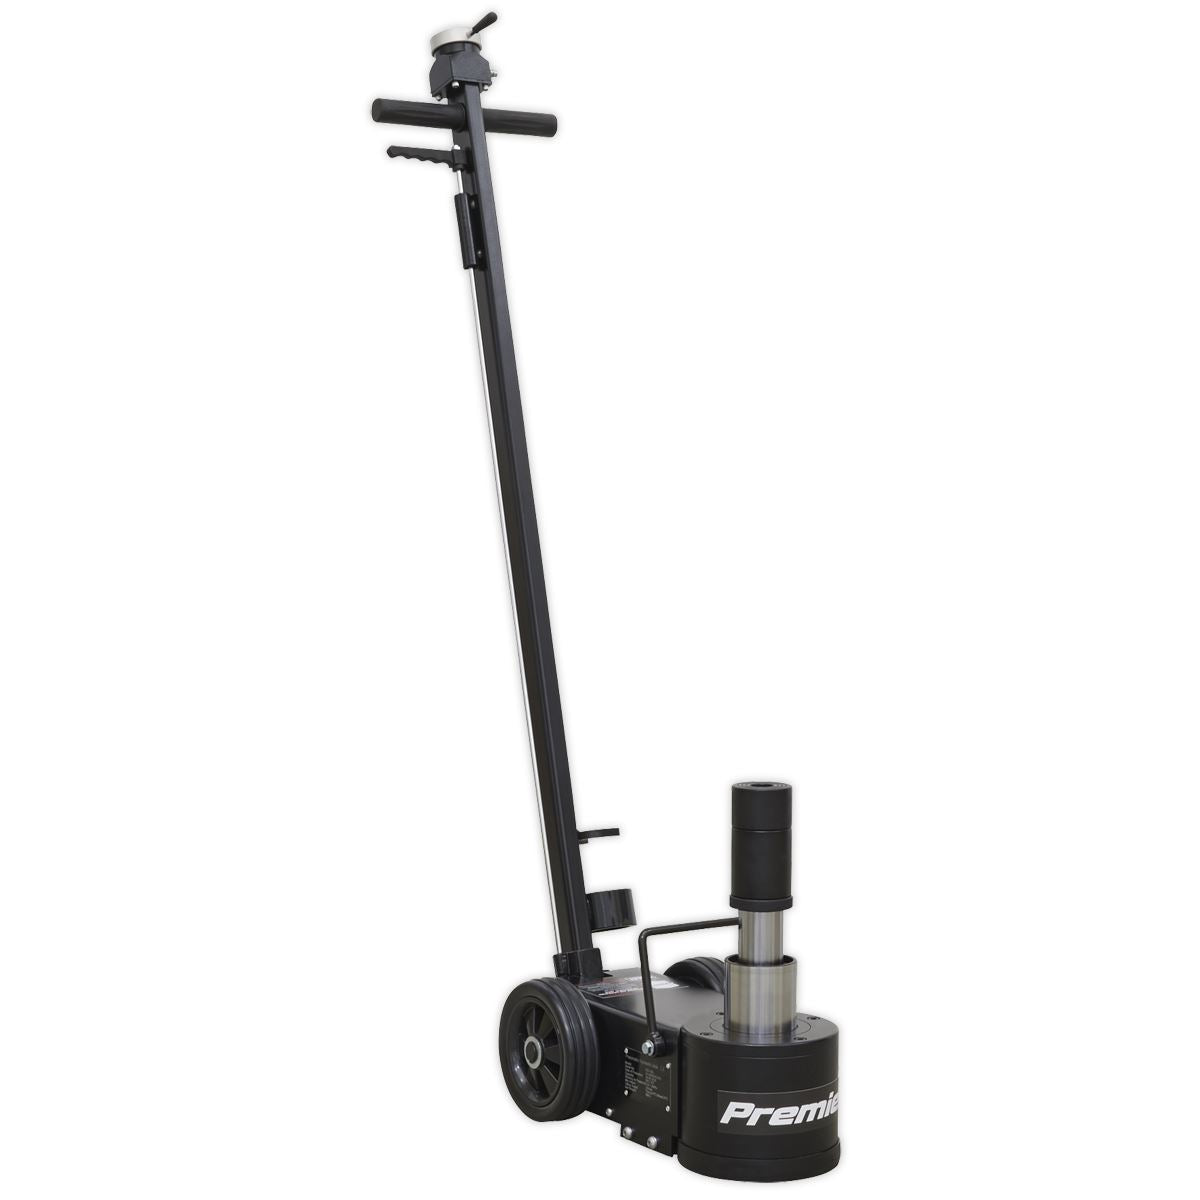 Sealey Premier Air Operated Jack 15-30 Tonne Telescopic